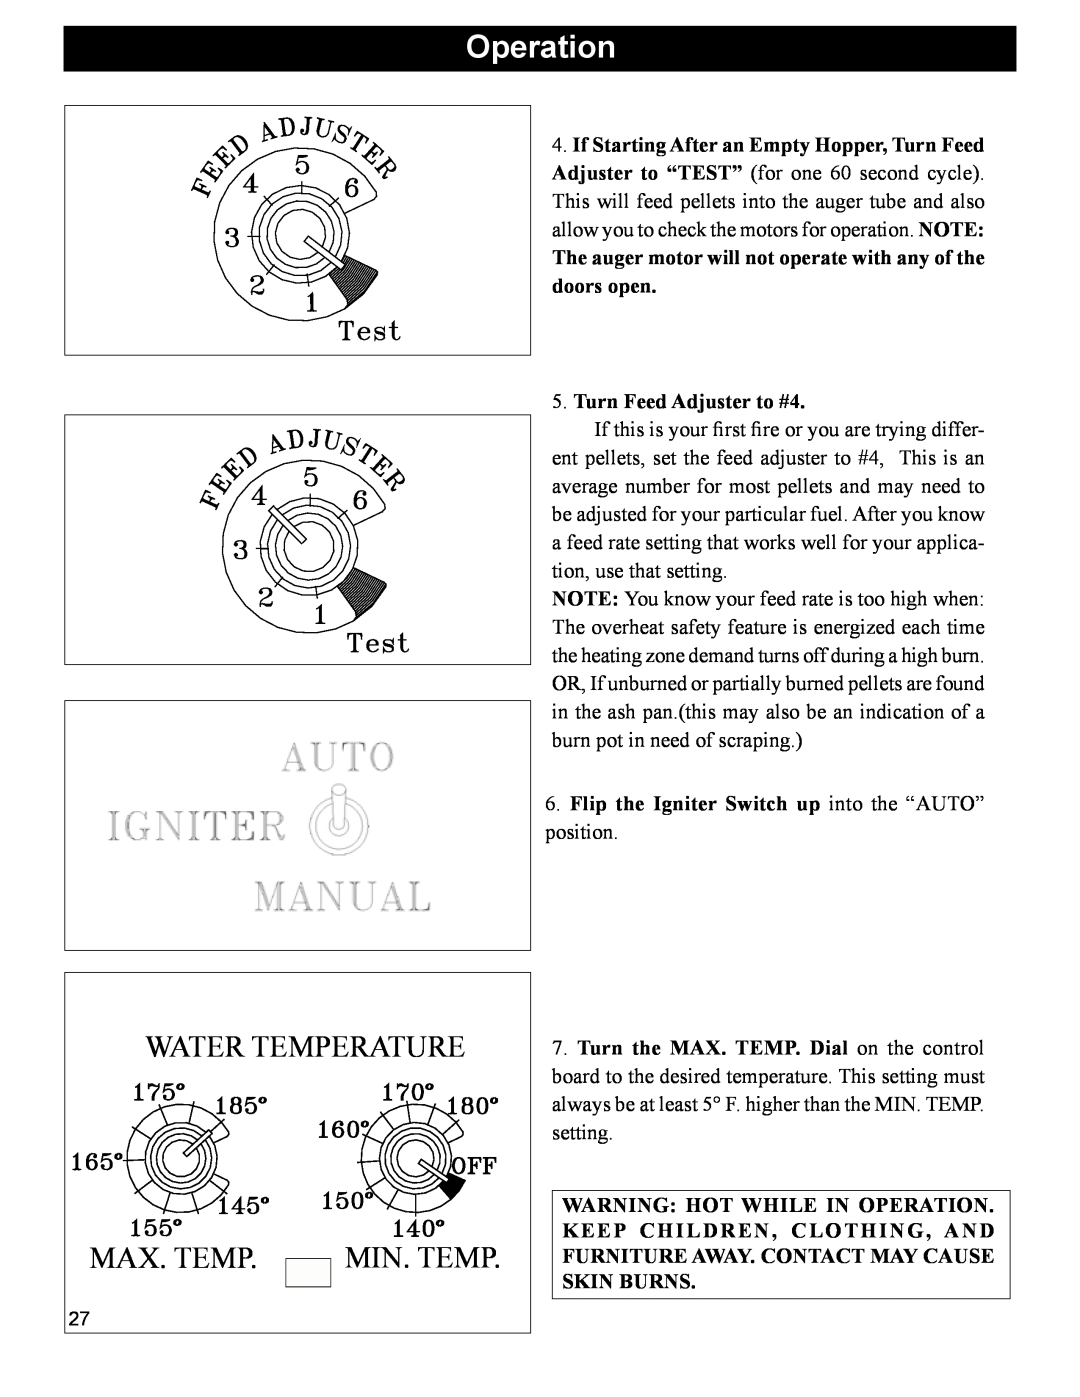 Hearth and Home Technologies BH 105 manual Operation, Water Temperature, Max. Temp, Min. Temp, Turn Feed Adjuster to #4 